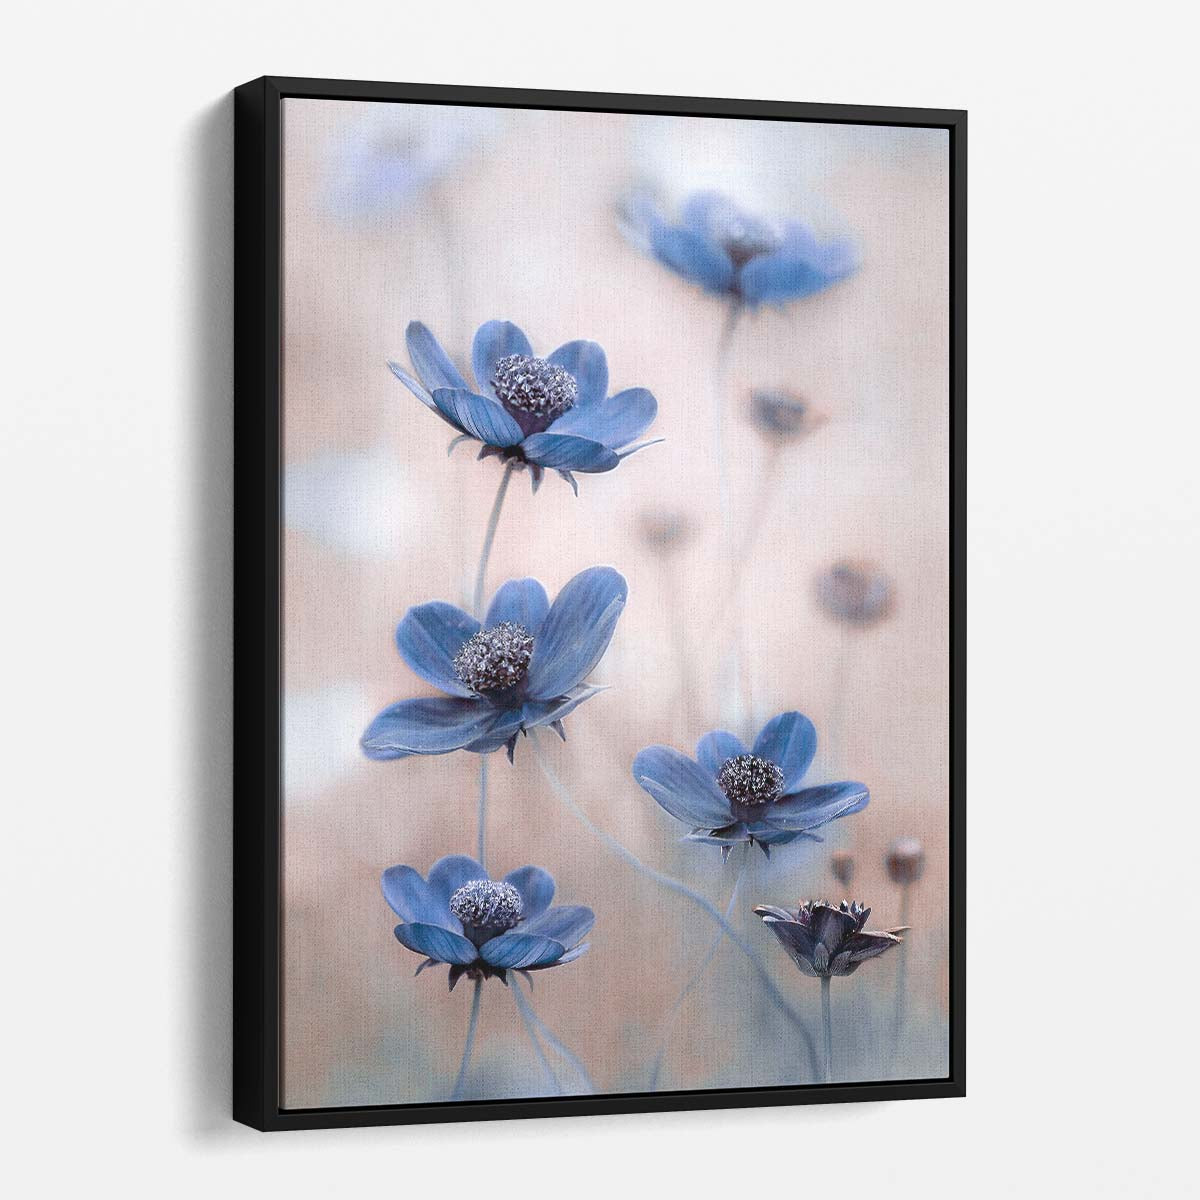 Blue Cosmos Flower Macro Photography Art - Pastel Spring Floral by Luxuriance Designs, made in USA